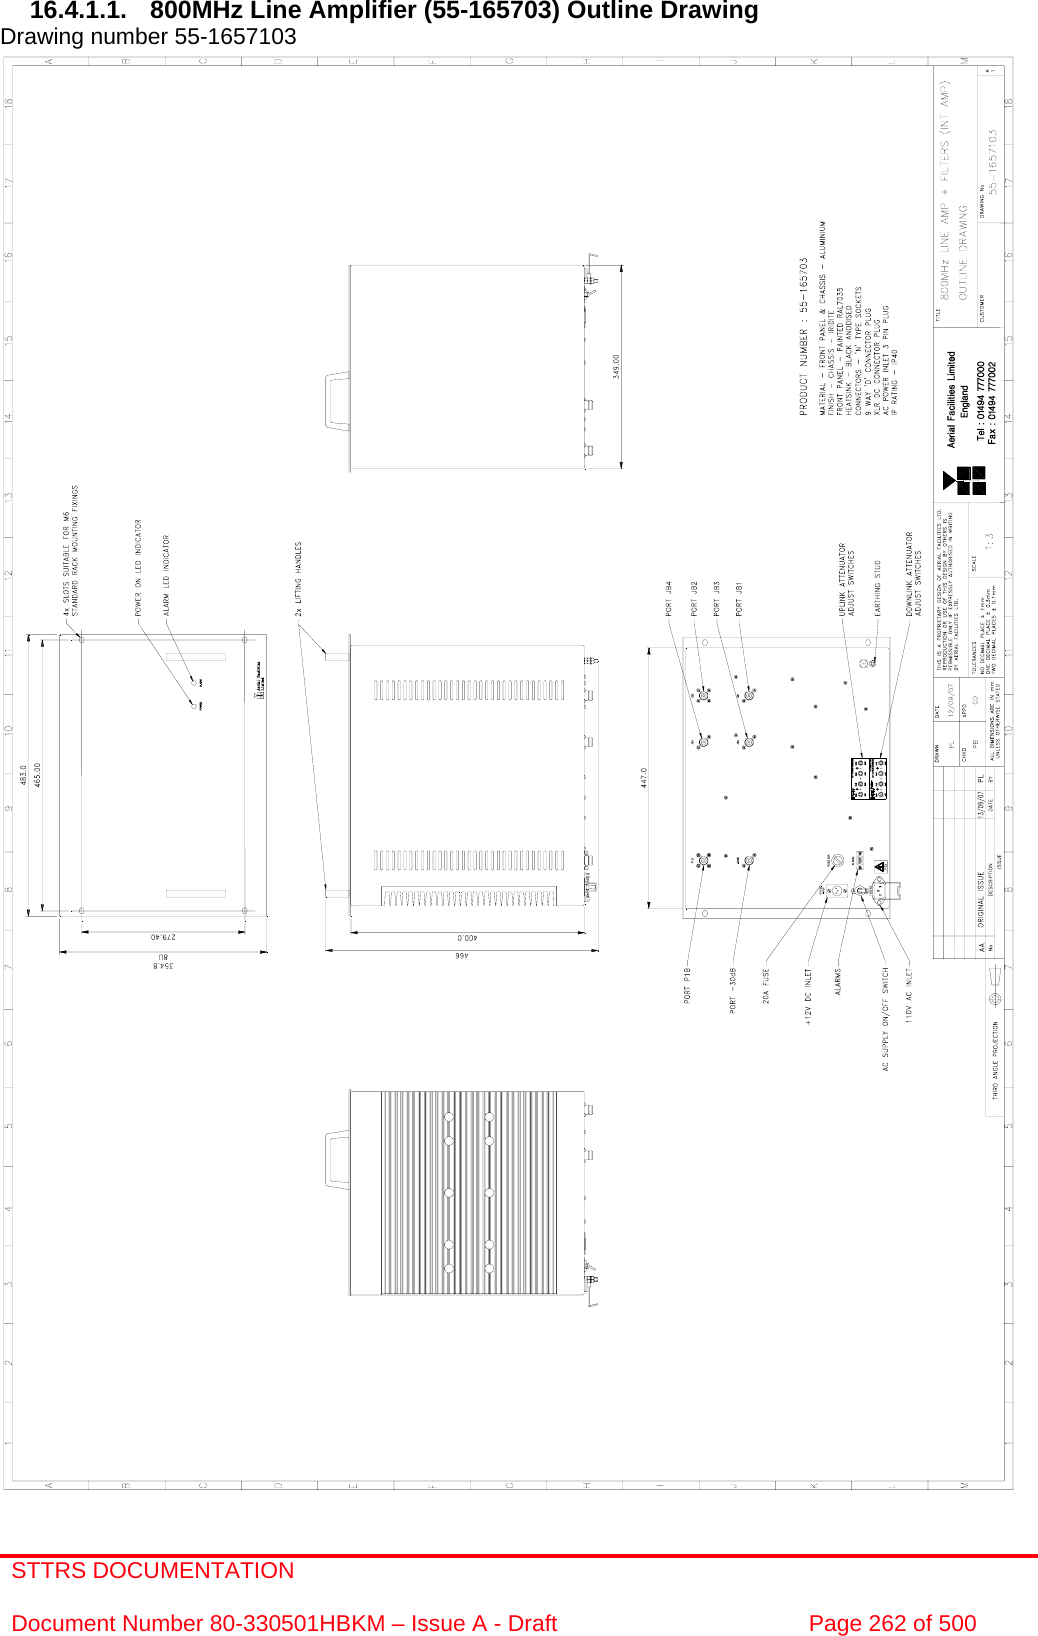 STTRS DOCUMENTATION  Document Number 80-330501HBKM – Issue A - Draft  Page 262 of 500   16.4.1.1.  800MHz Line Amplifier (55-165703) Outline Drawing Drawing number 55-1657103                                                        